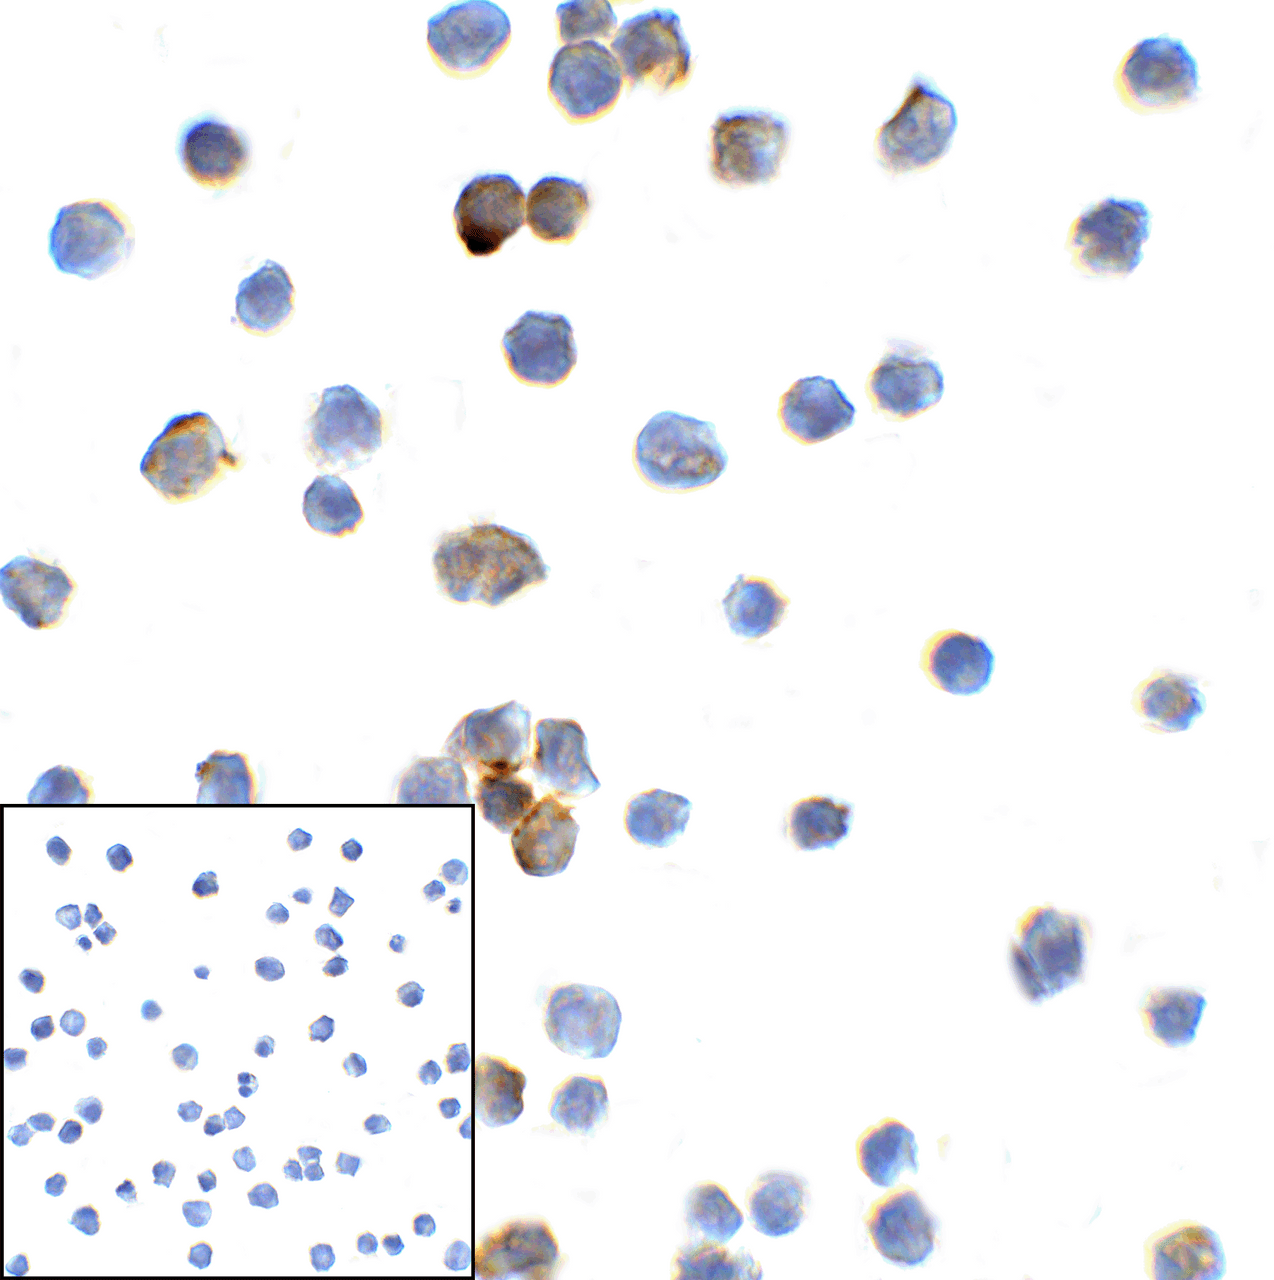 Immunocytochemistry of TMIGD2 in transfected HEK293 cells with TMIGD2 antibody at 2 ug/mL. Lower left: Immunocytochemistry in transfected HEK293 cells with control mouse IgG antibody at 2 ug/mL.